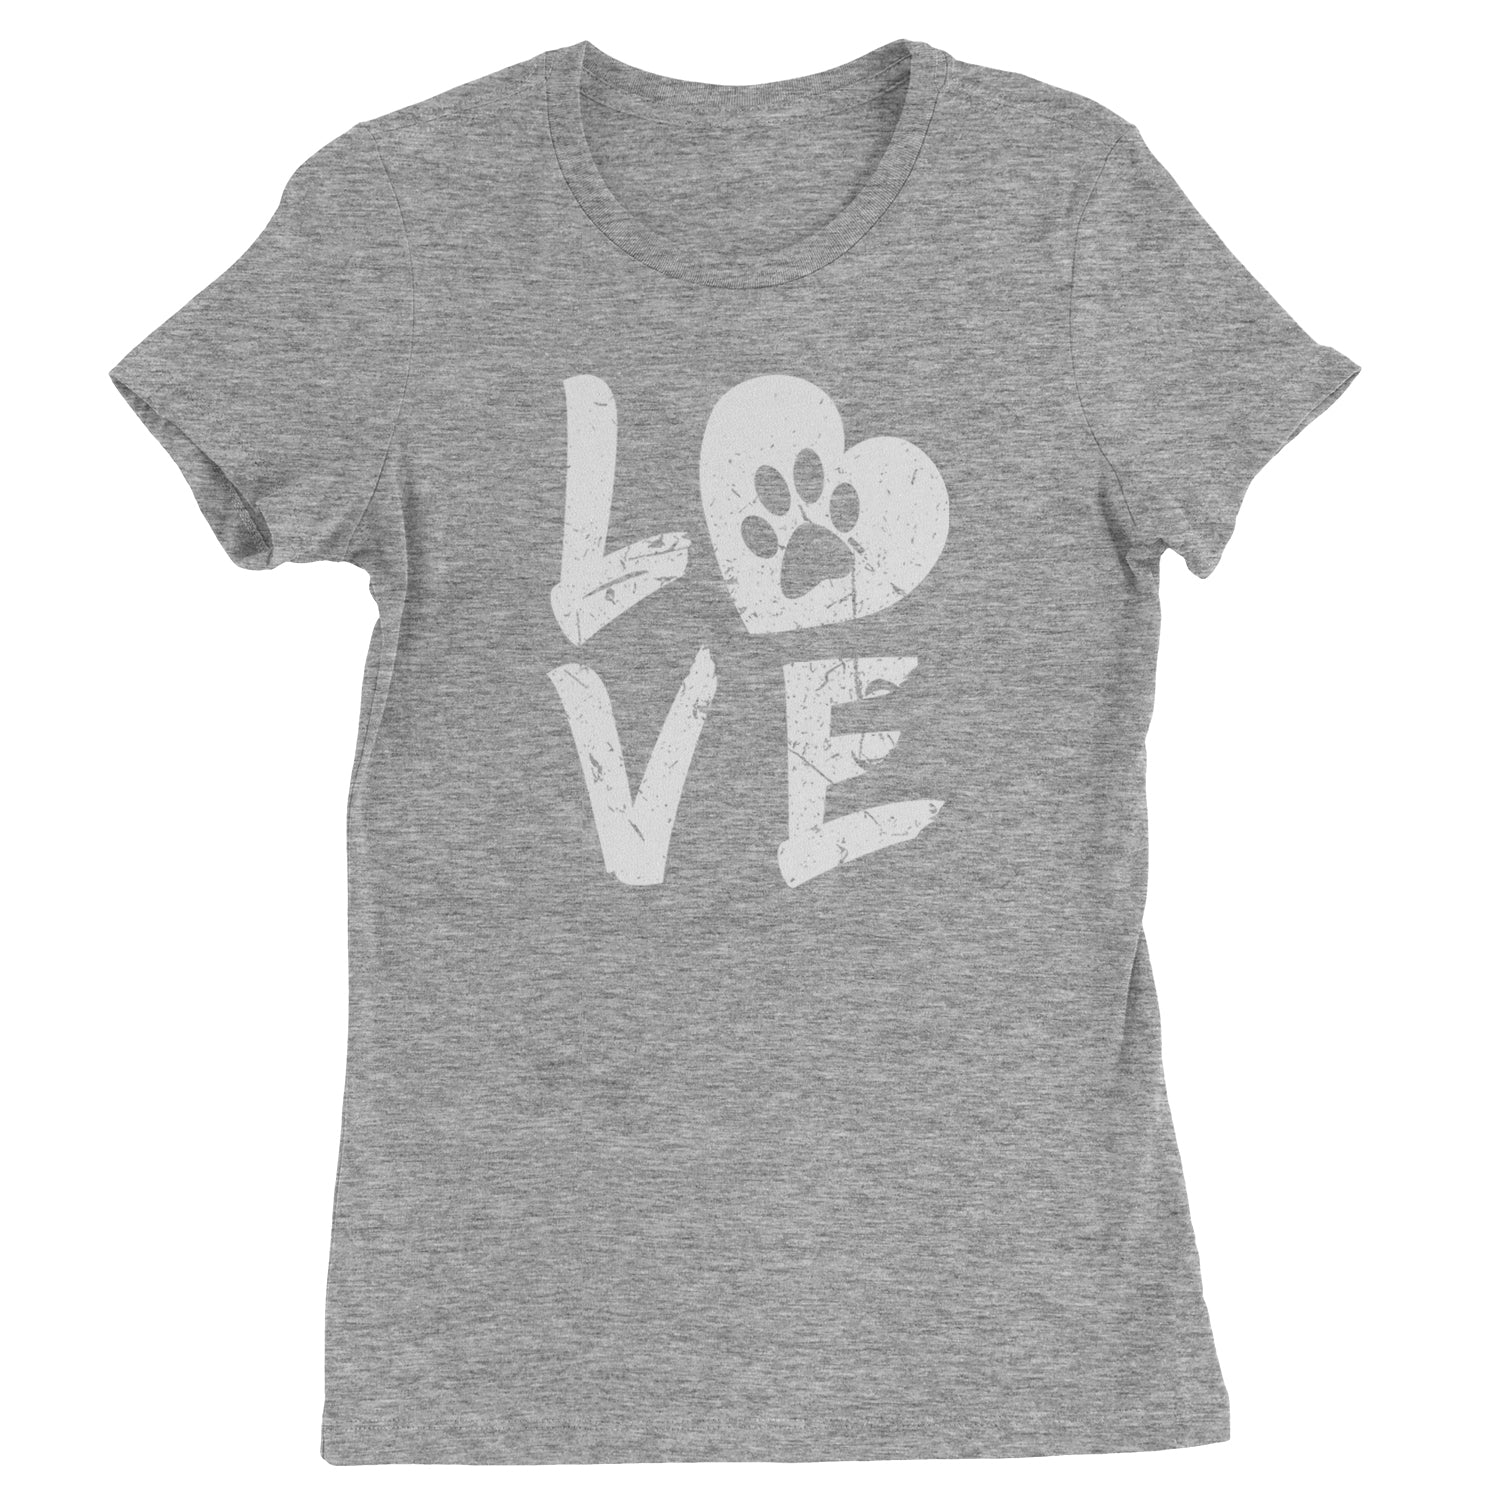 I Love My Dog Paw Print Womens T-shirt dog, doggie, heart, love, lover, paw, print, puppy by Expression Tees